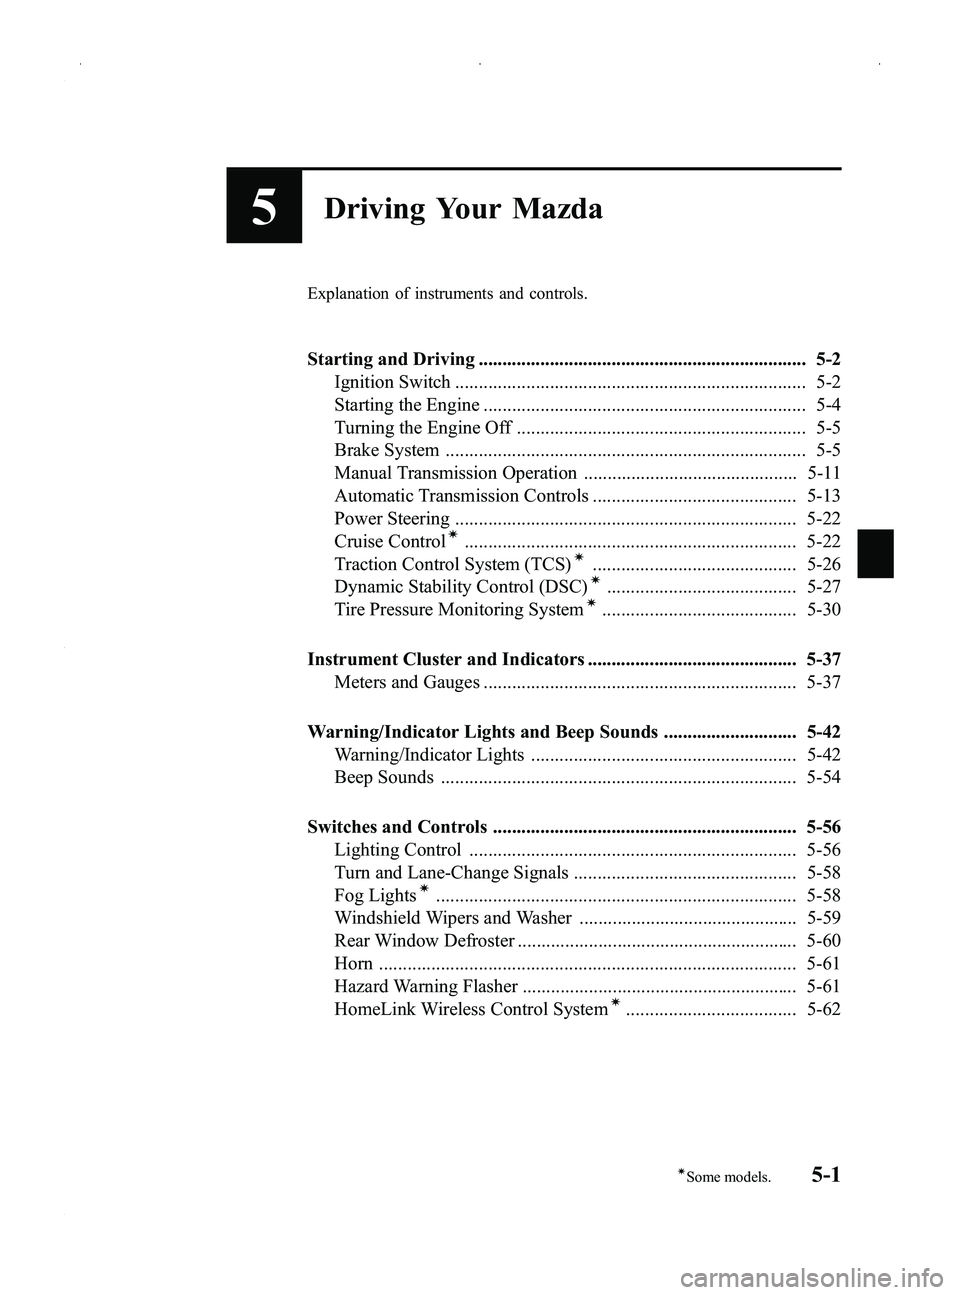 MAZDA MODEL MX-5 MIATA PRHT 2014  Owners Manual Black plate (145,1)
5Driving Your Mazda
Explanation of instruments and controls.
Starting and Driving ..................................................................... 5-2Ignition Switch .........